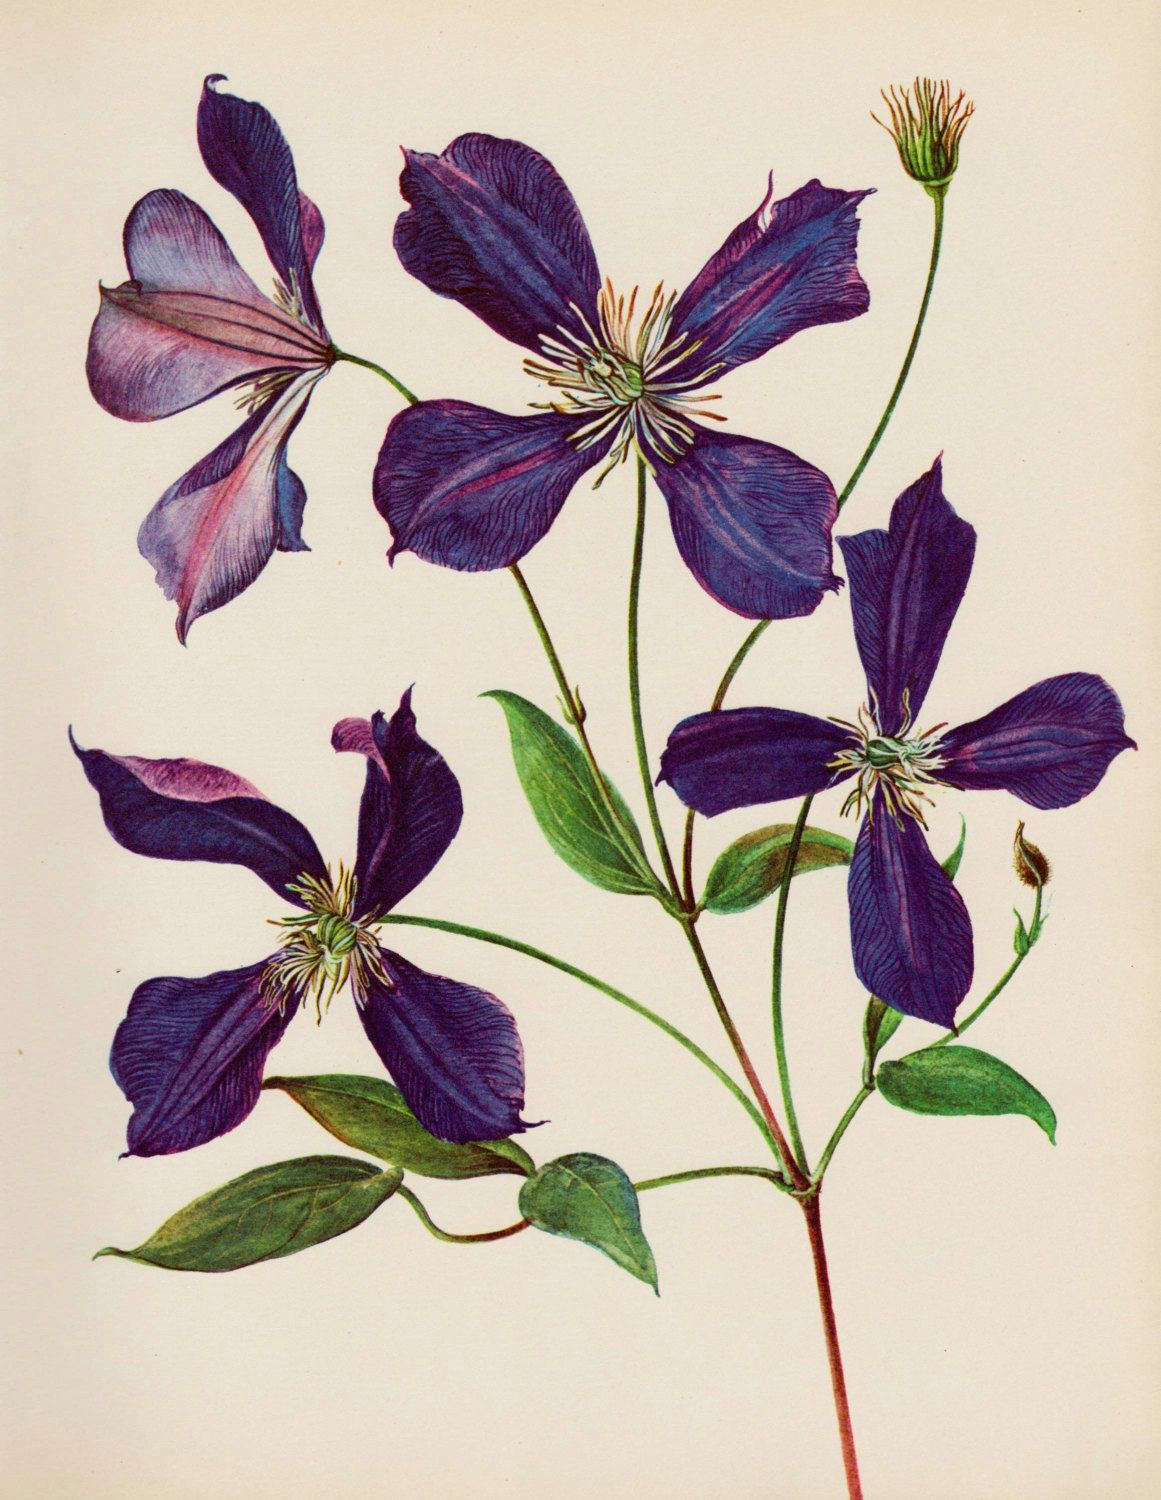 Drawings Of Clematis Flowers French Country Decor Vintage Purple Clematis Flower Print Country